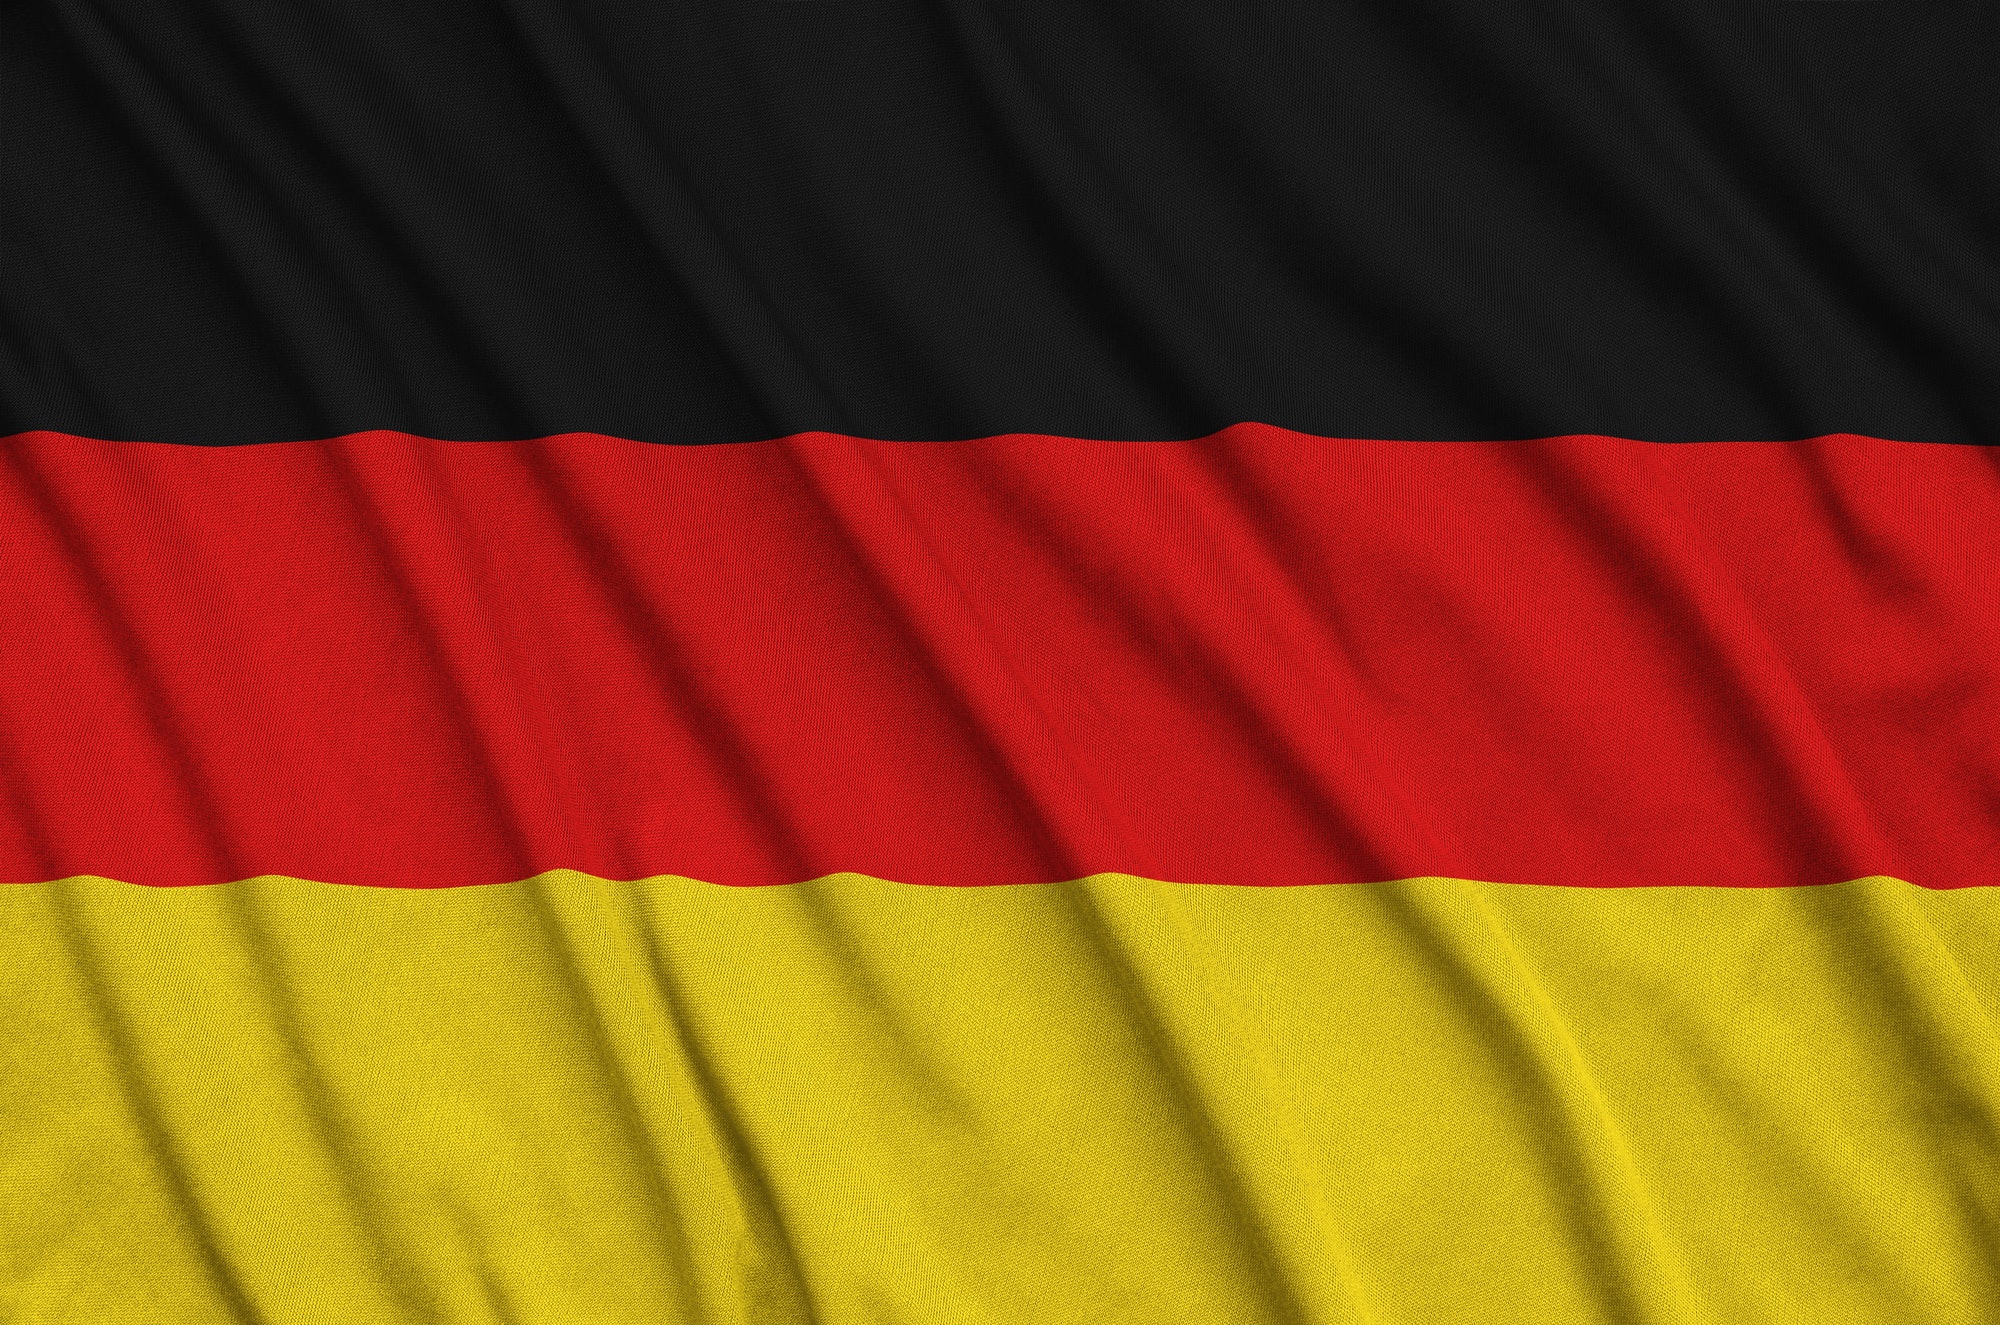 germany-flag-is-depicted-on-a-sports-cloth-fabric-with-many-folds-sport-team-waving-banner.jpg